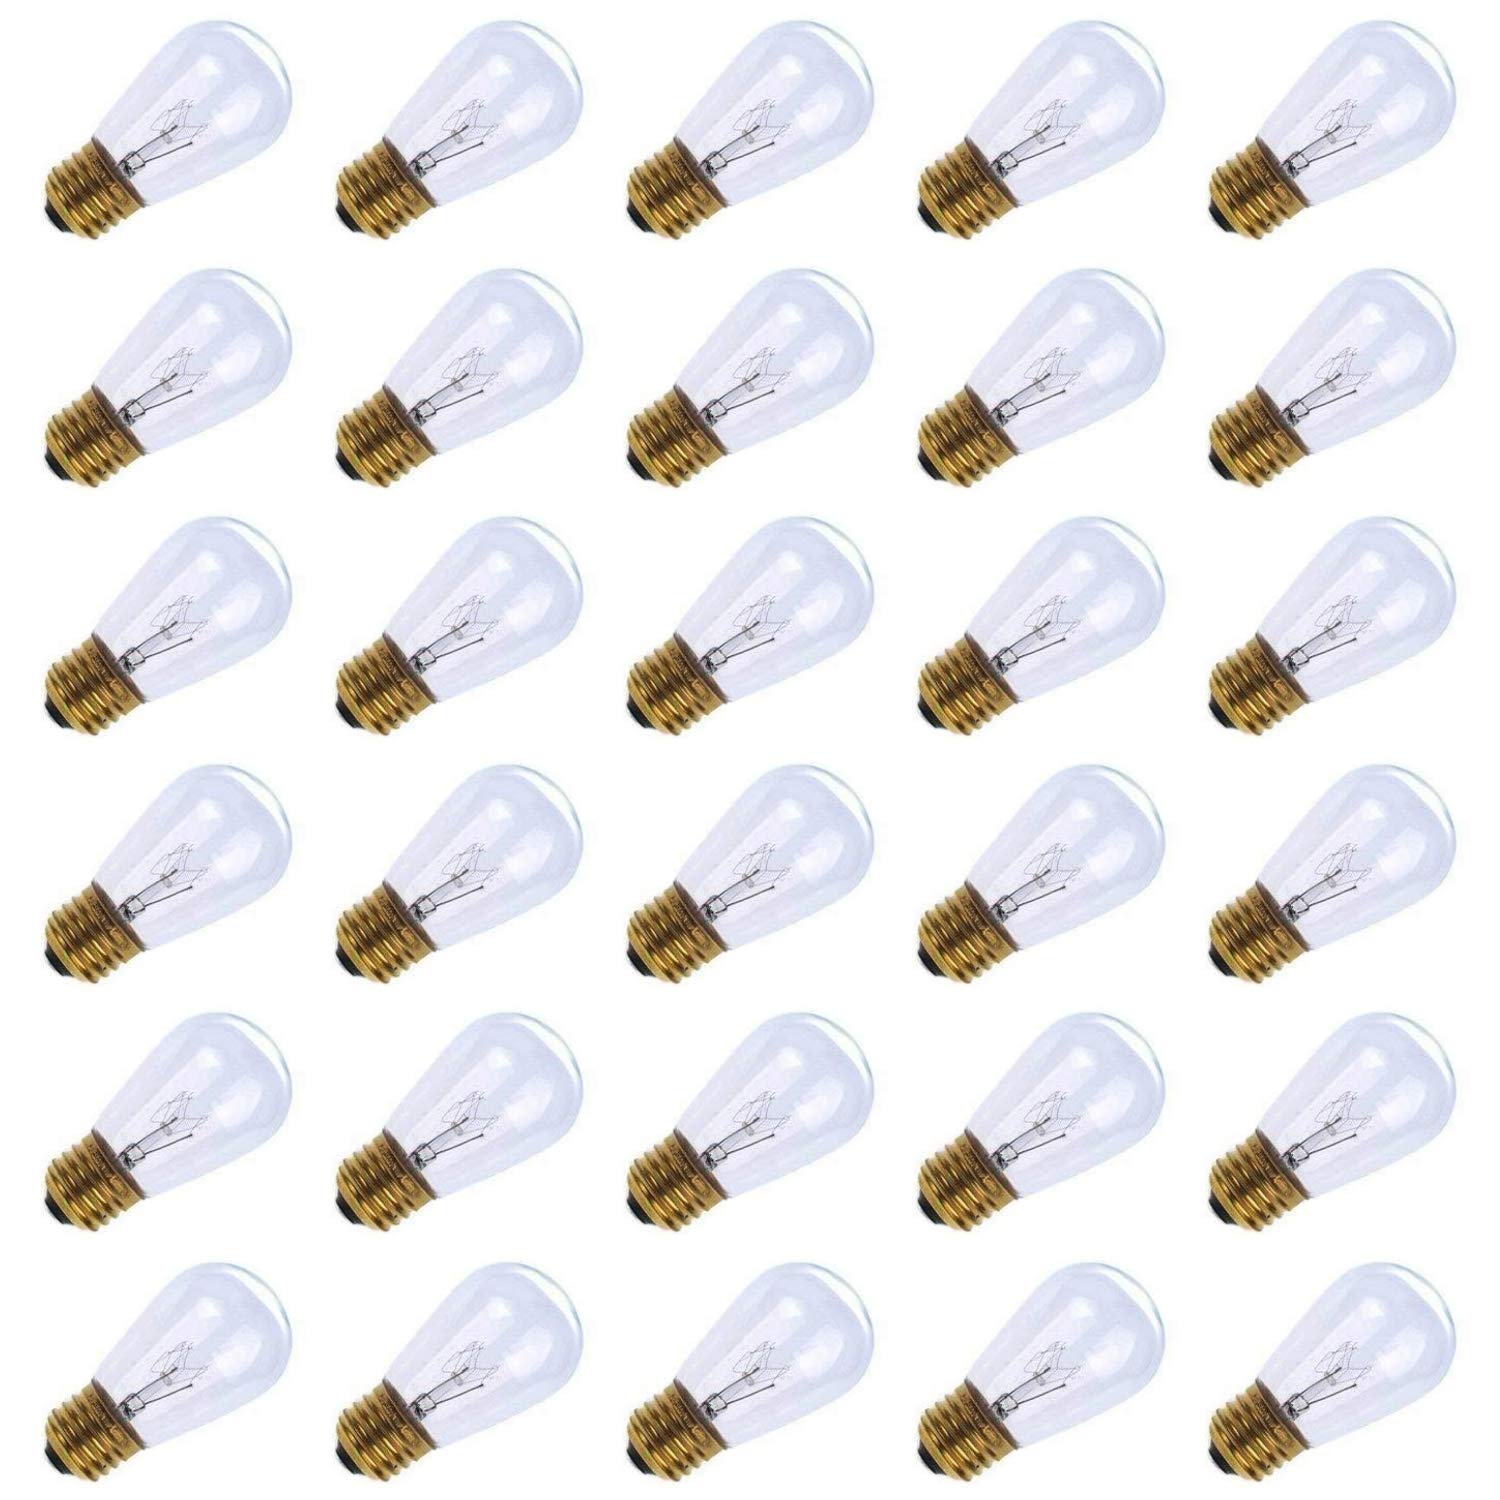 30 Count / Incandescent Bulbs / Clear